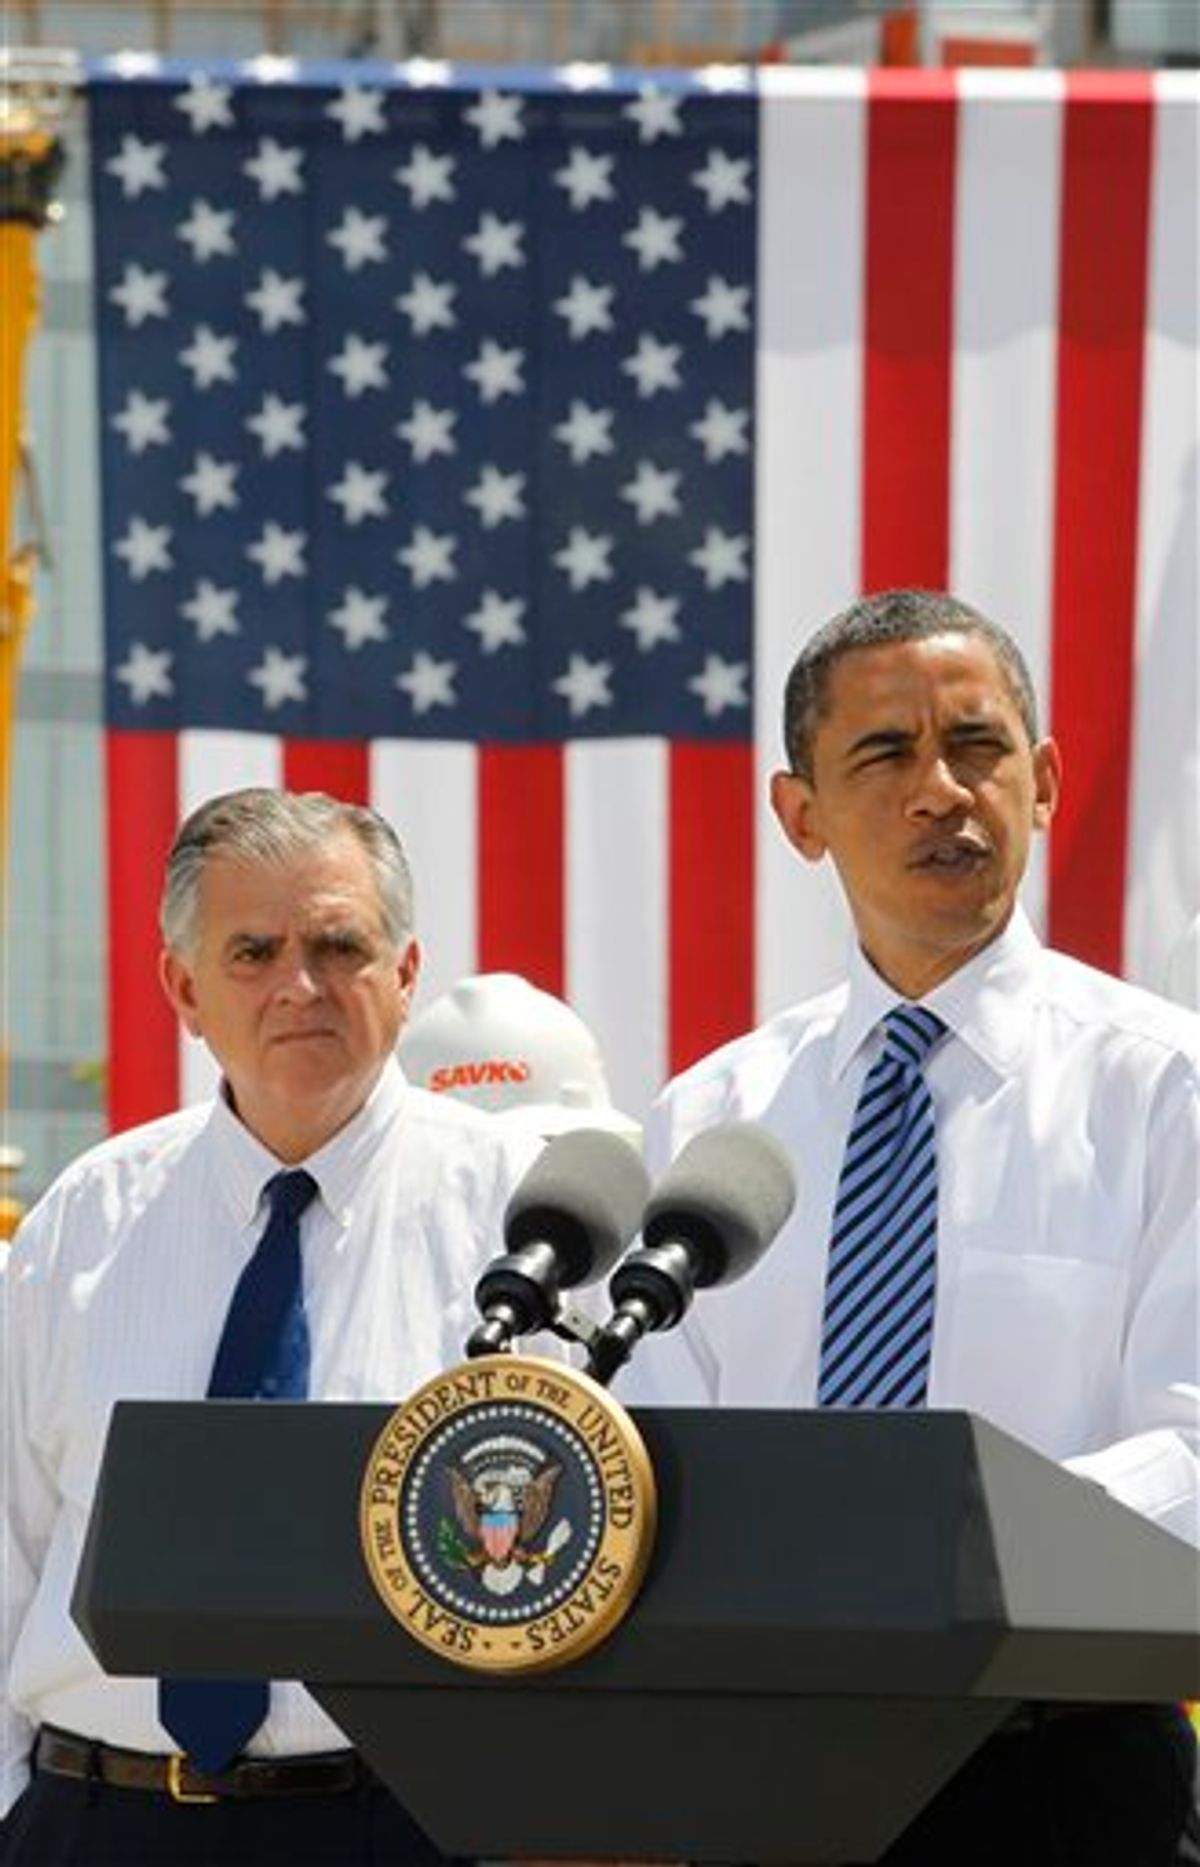 President Barack Obama, accompanied by Transportation Secretary Ray LaHood, speaks at a Recovery Act highway project in Columbus, Ohio, Friday, June 18, 2010. (AP Photo/Charles Dharapak) (AP)